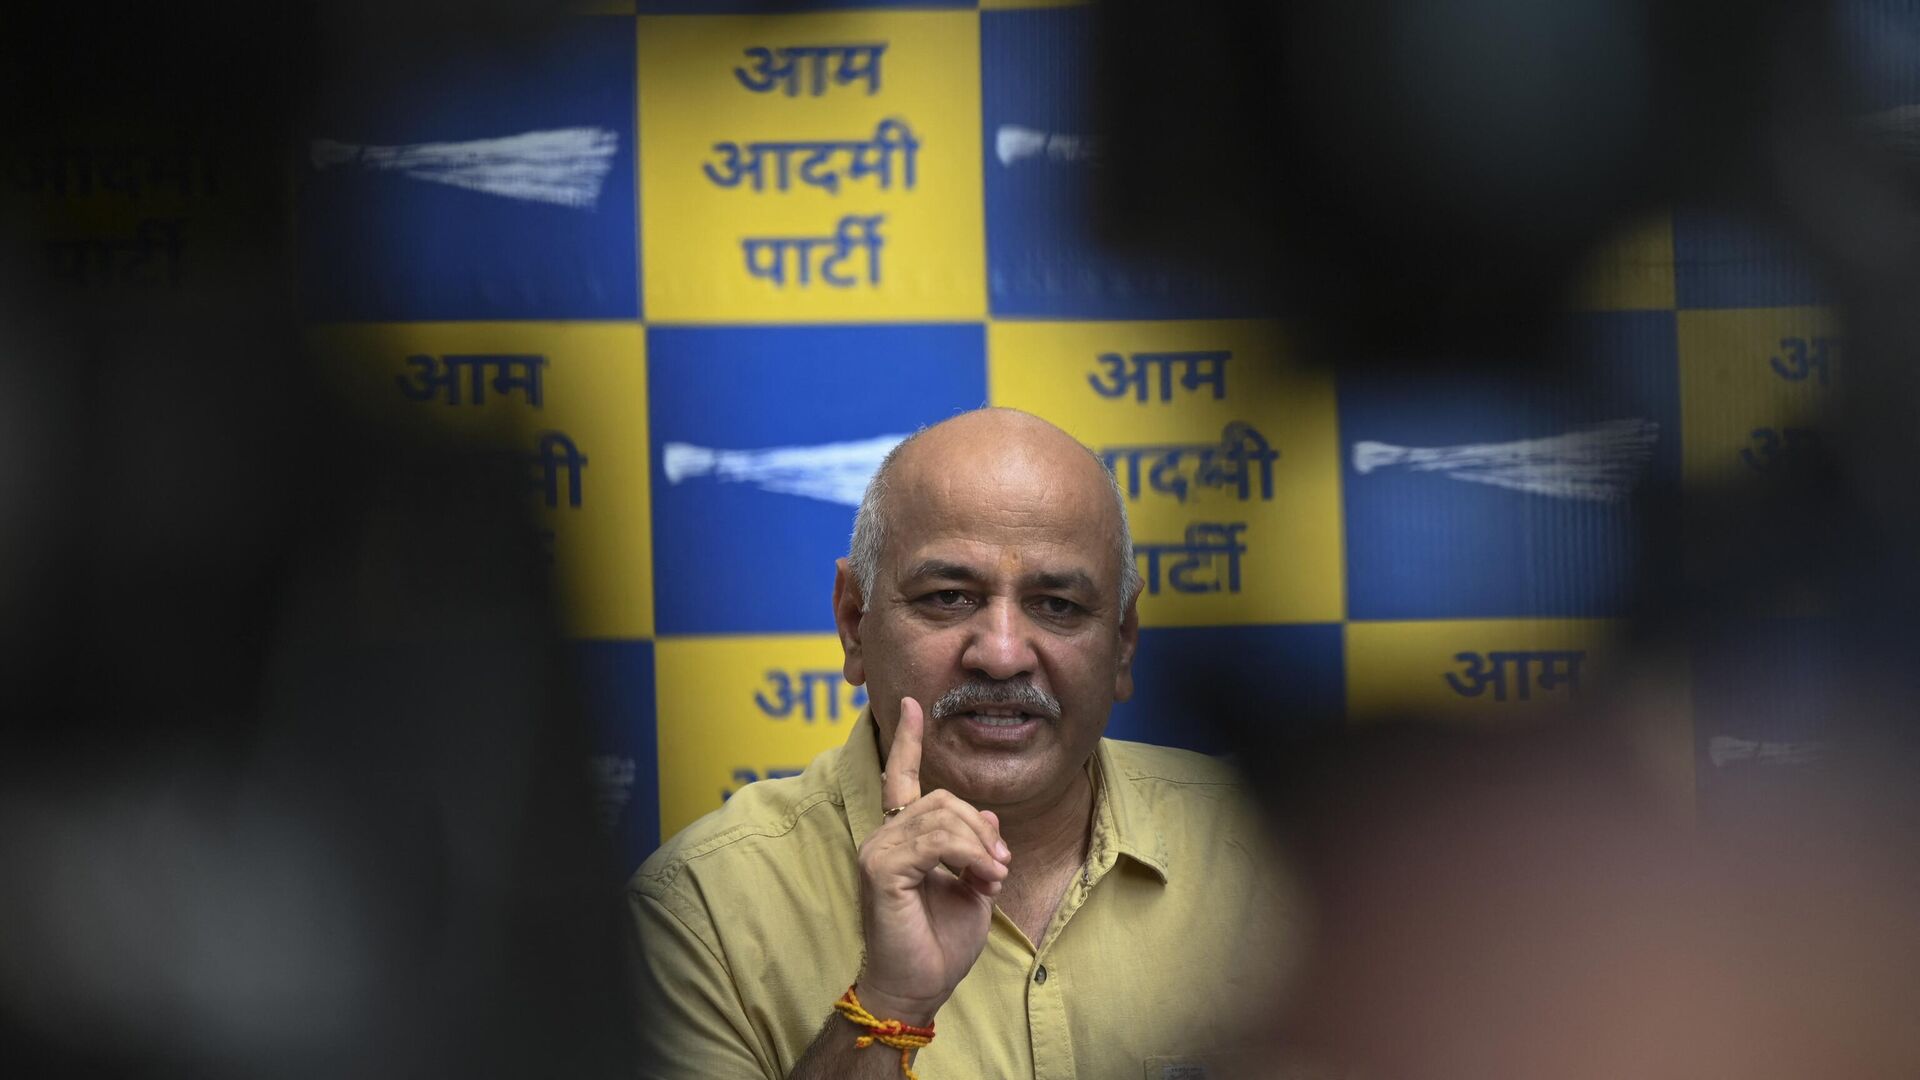 Delhi deputy chief minister Manish Sisodia speaks during a press conference in New Delhi on August 20, 2022, after the Central Bureau of Investigation (CBI) had raided his home in relation to alleged irregularities with the implementation of the Excise Policy 2021-22. - Sputnik India, 1920, 16.03.2023